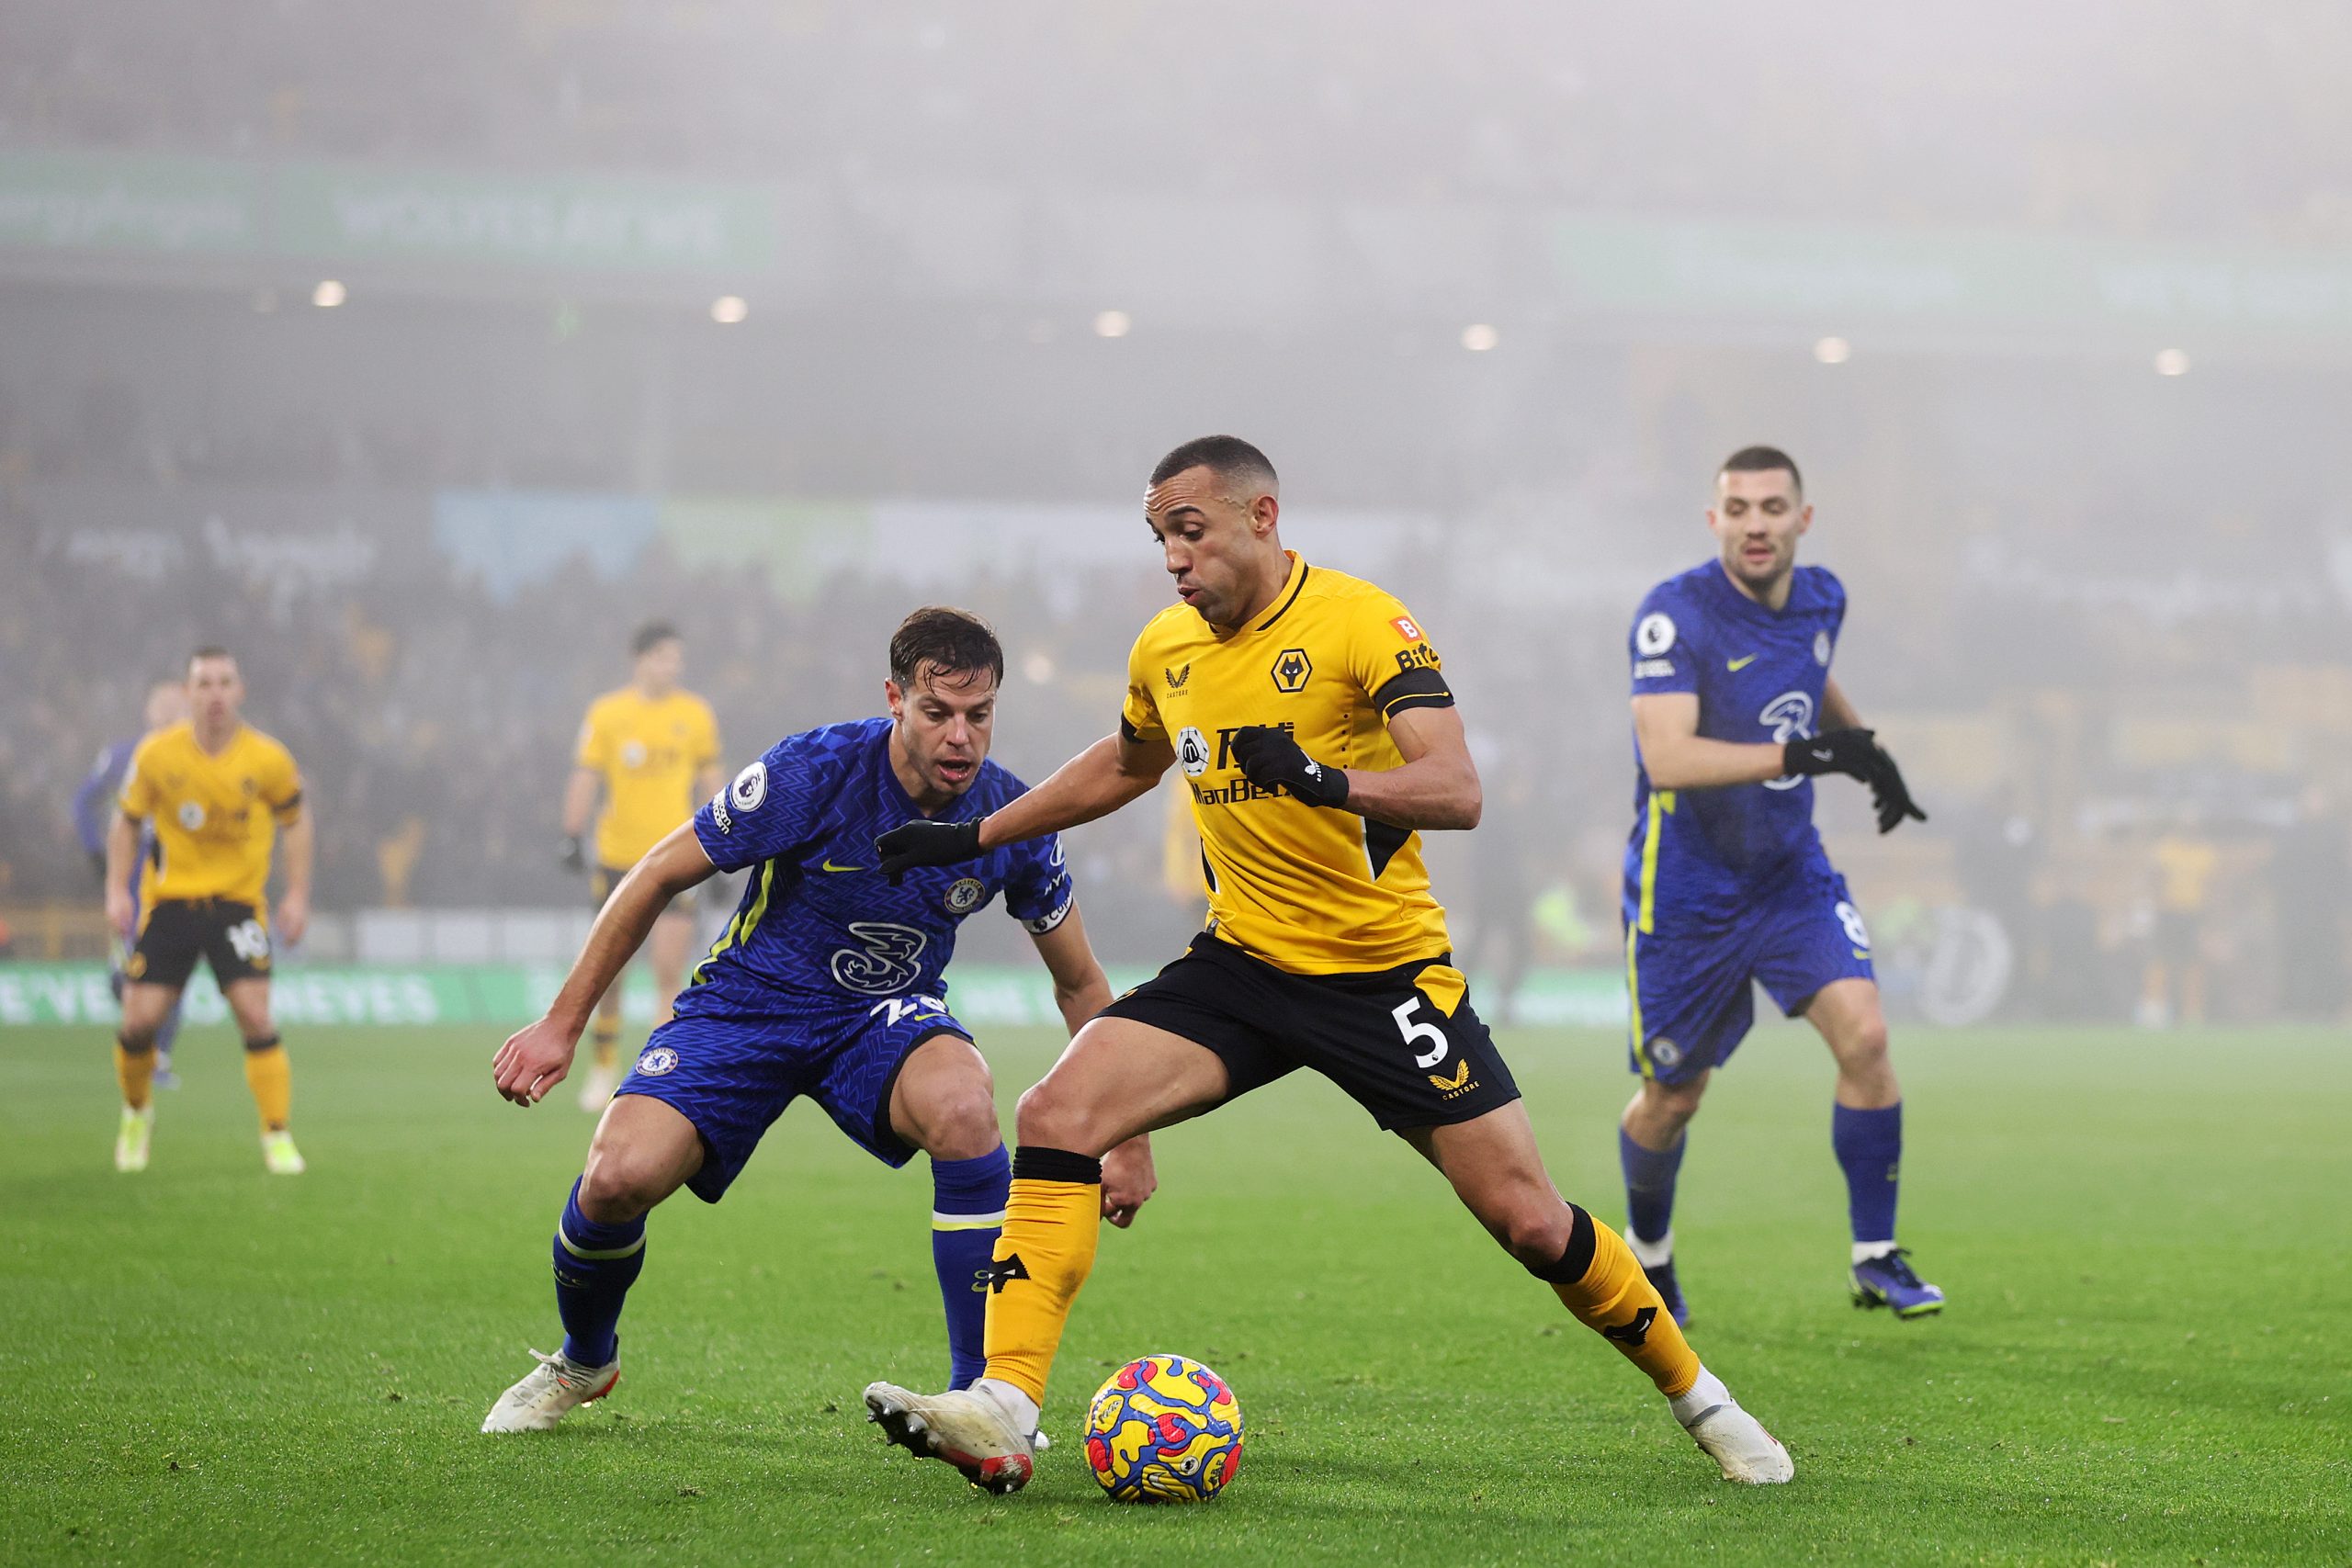 Wolves set to face Manchester City